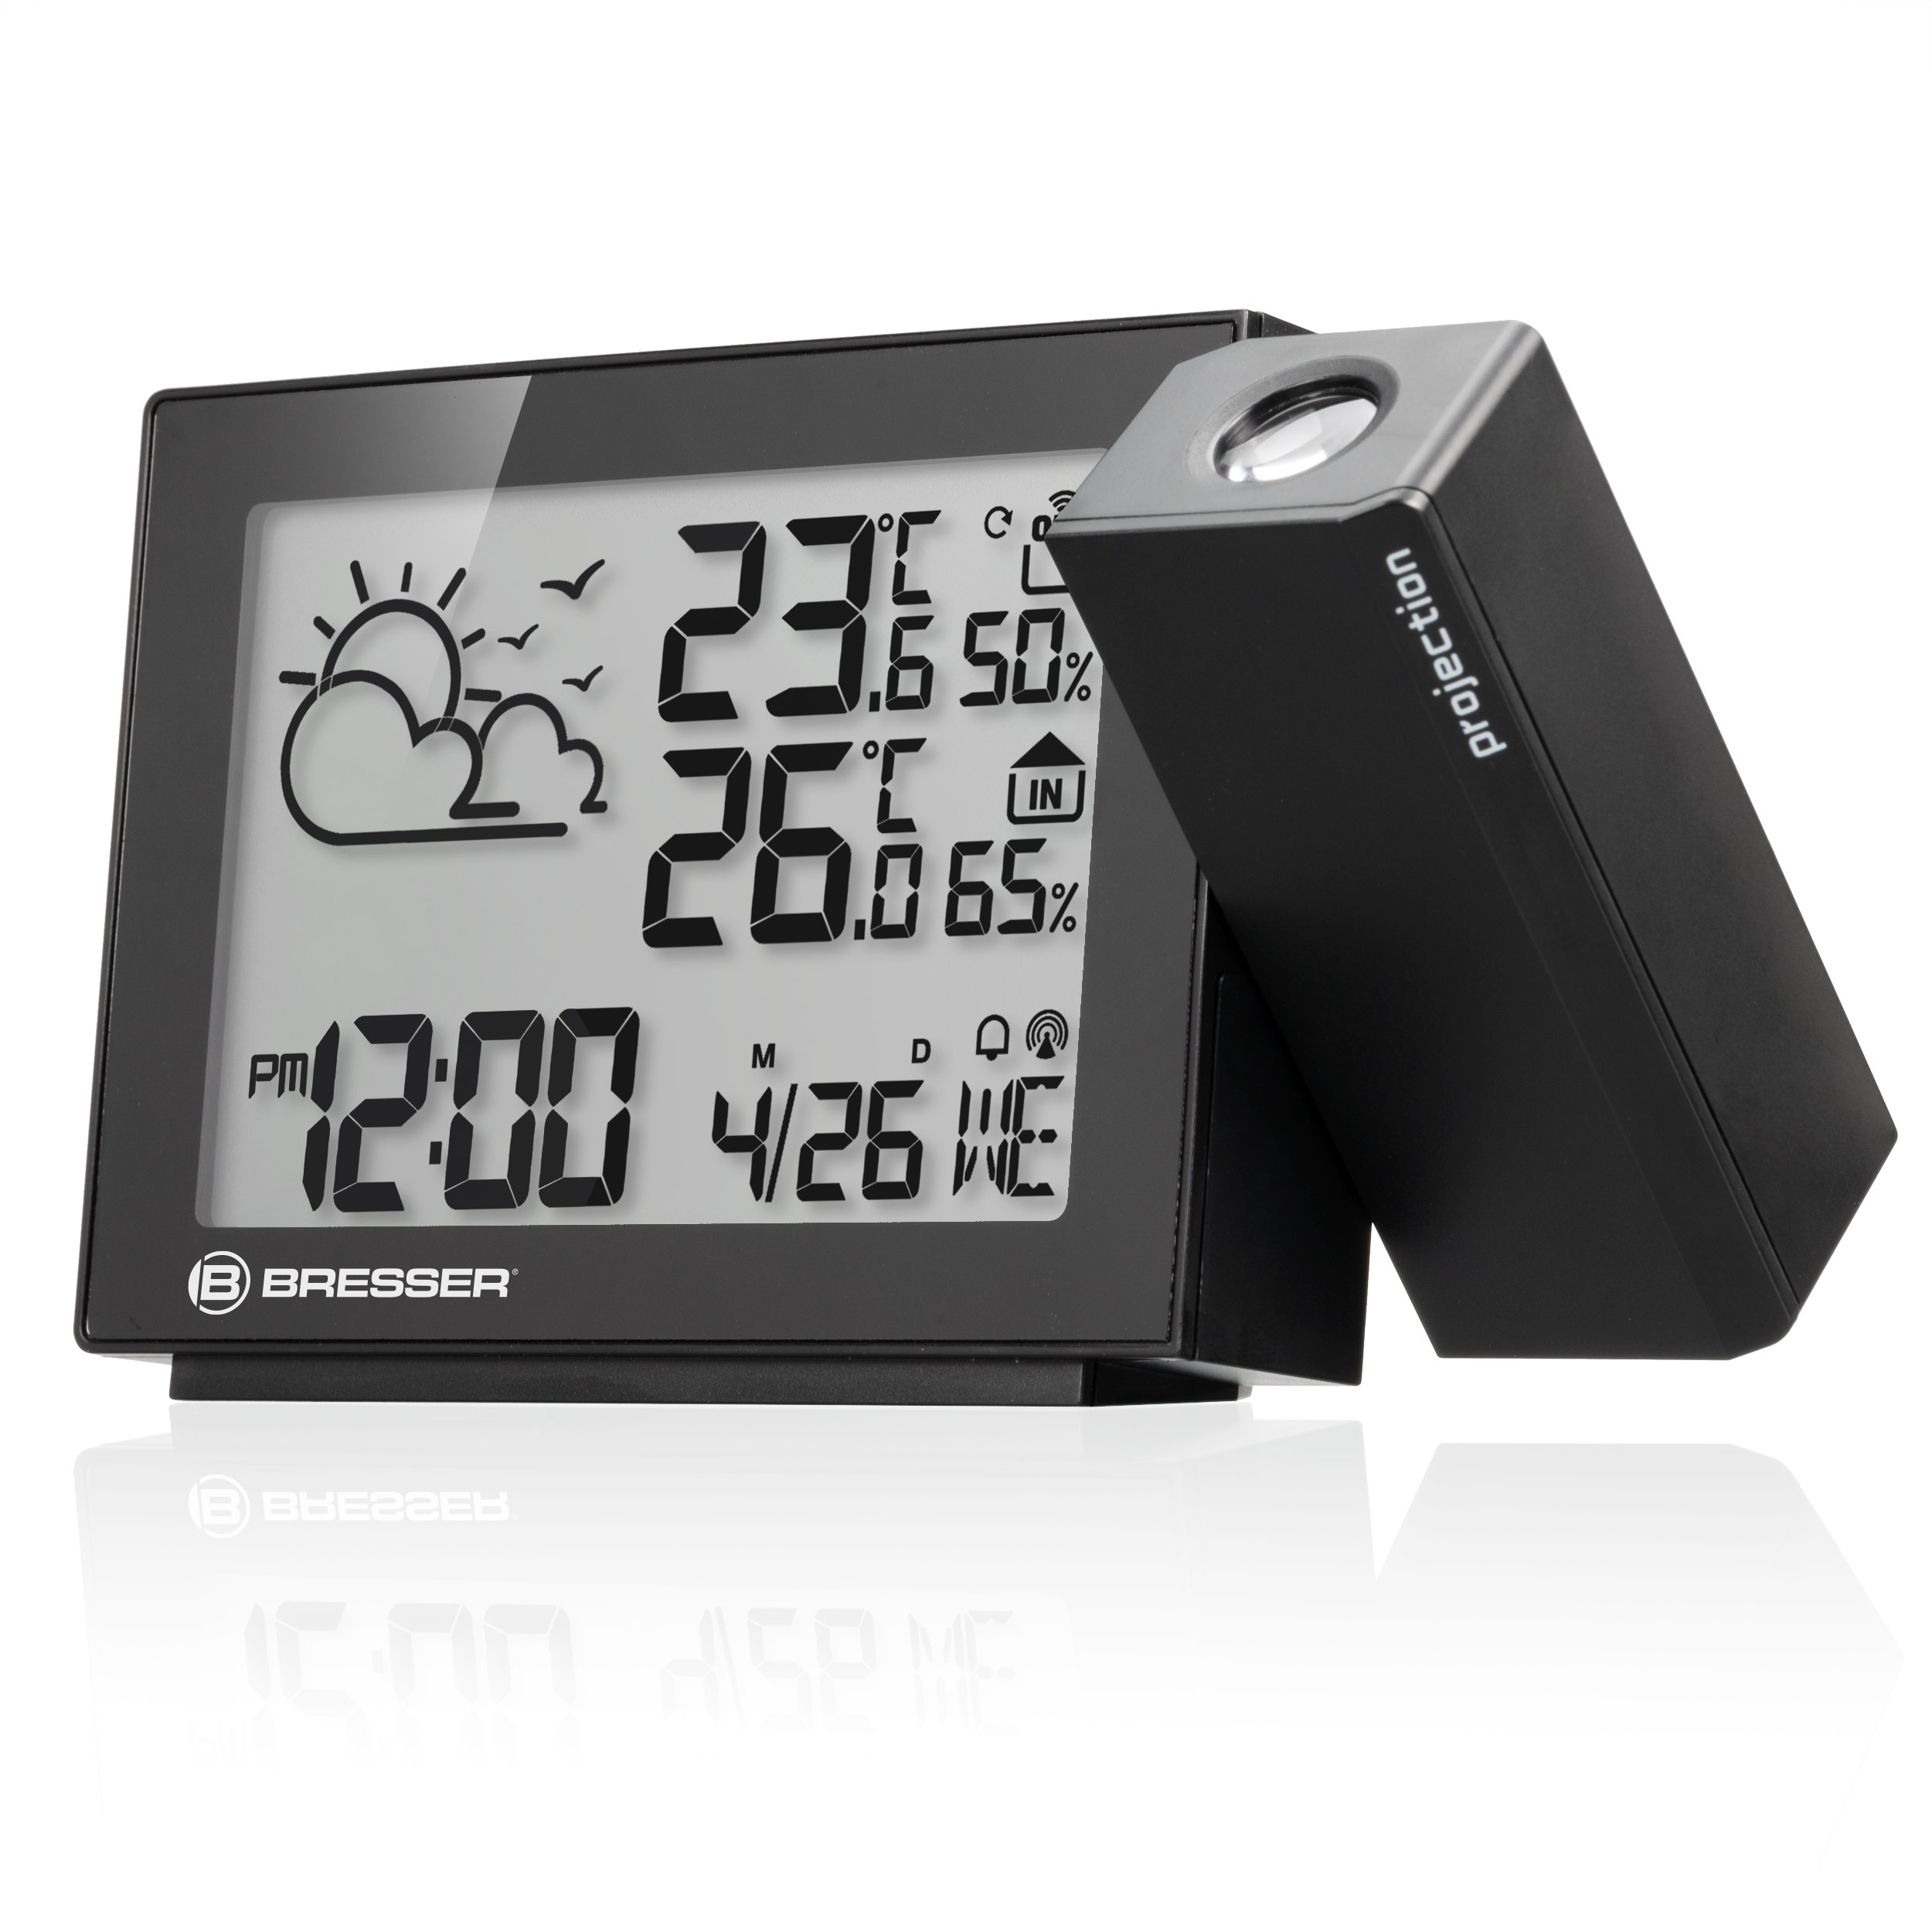 BRESSER Projection Radio-Controlled Weather Station MeteoTemp P (Refurbished)